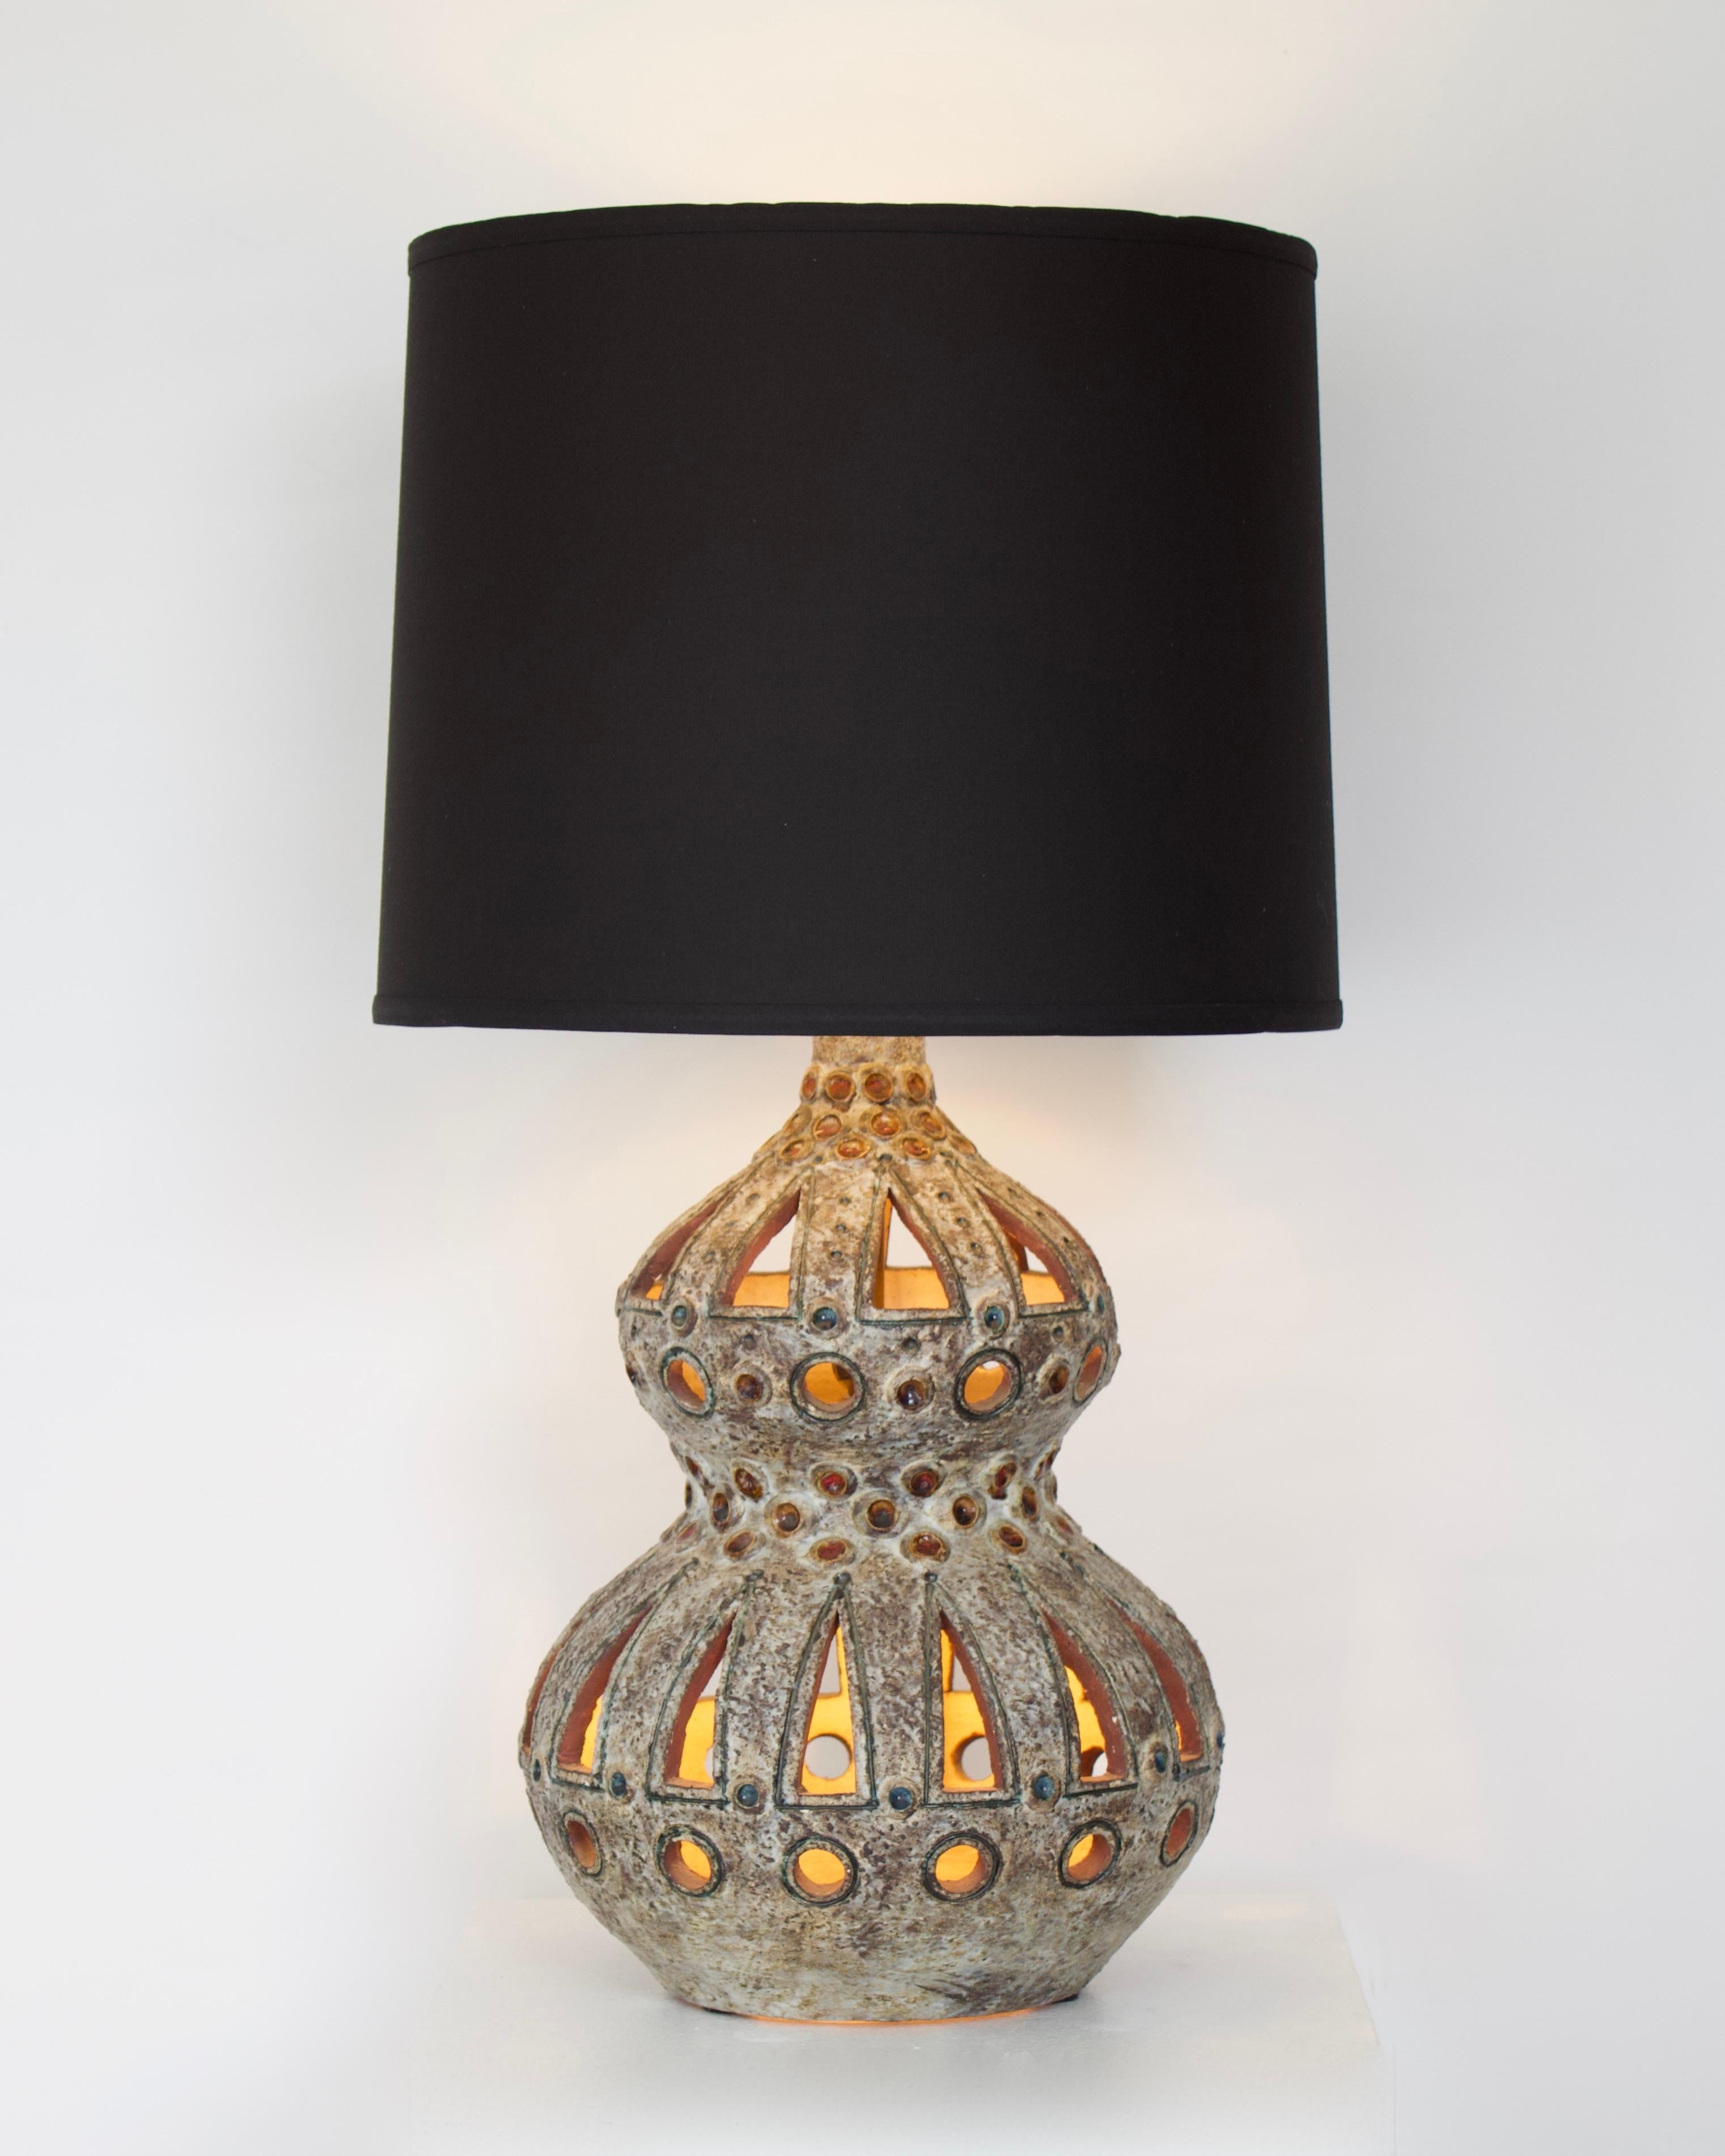 Raphaël Giarrusso French Pierced and Glazed Ceramic Table Lamp In Good Condition For Sale In Chicago, IL